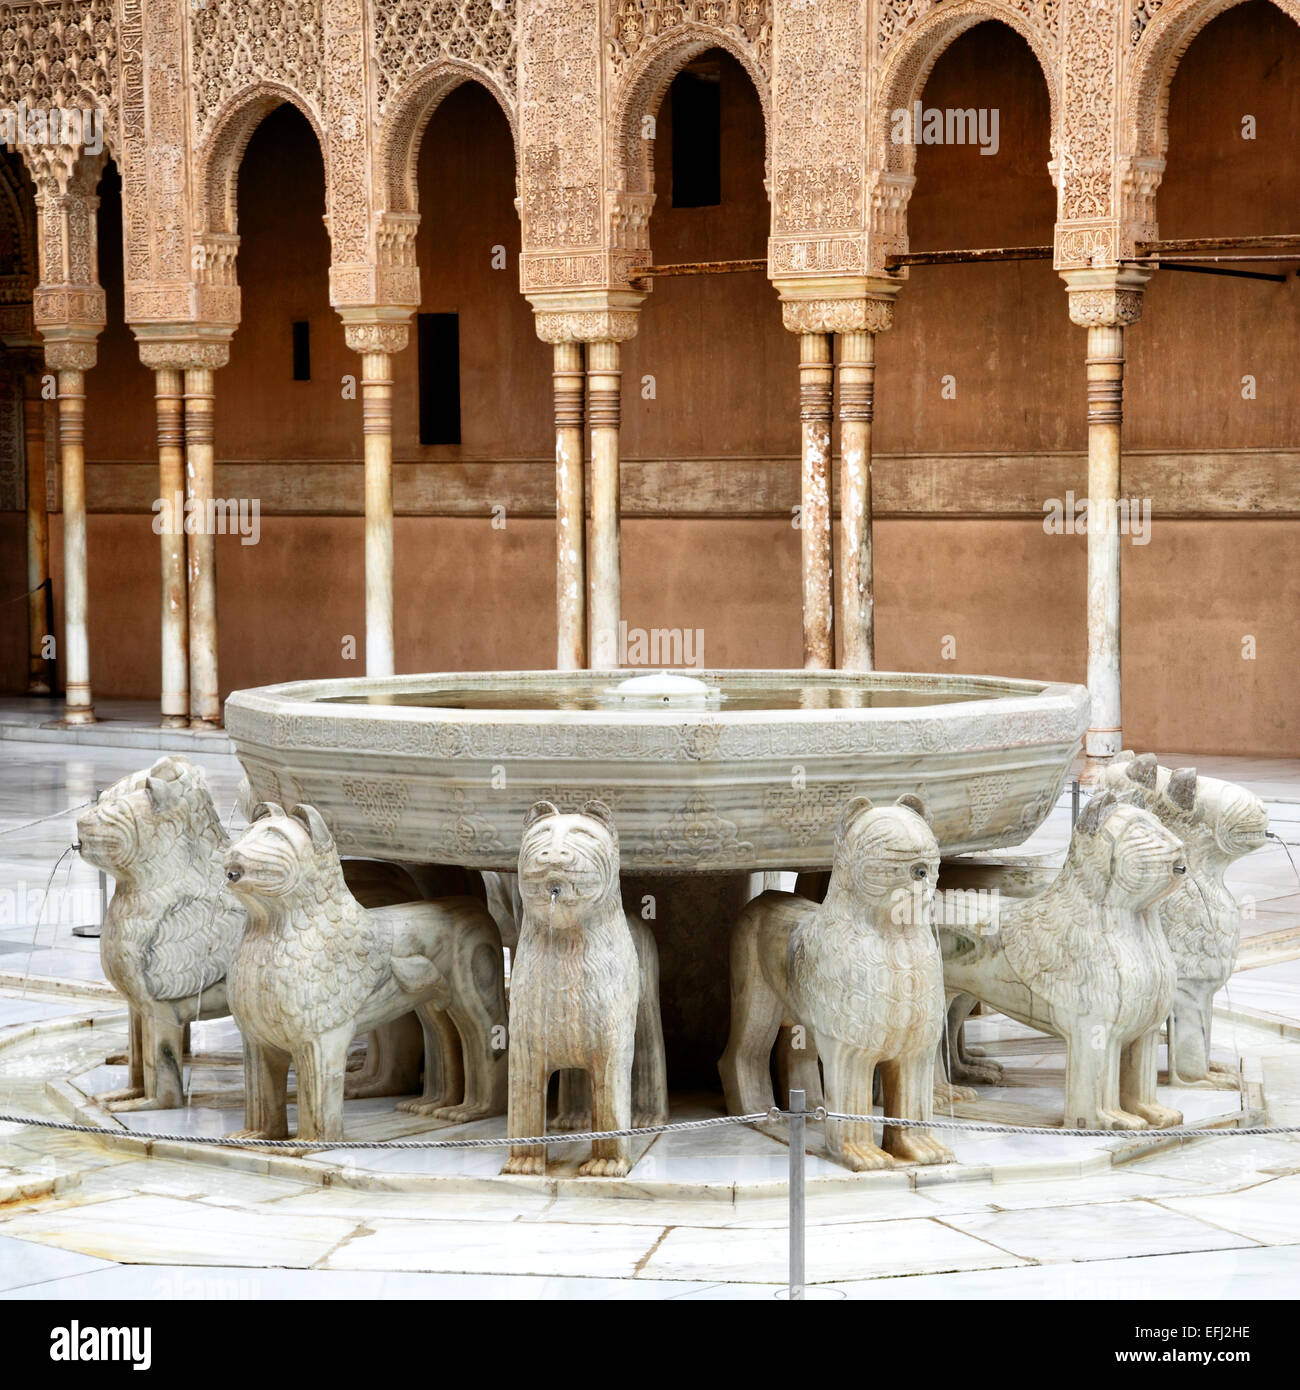 Fountain of the Lions in the Alhambra Stock Photo